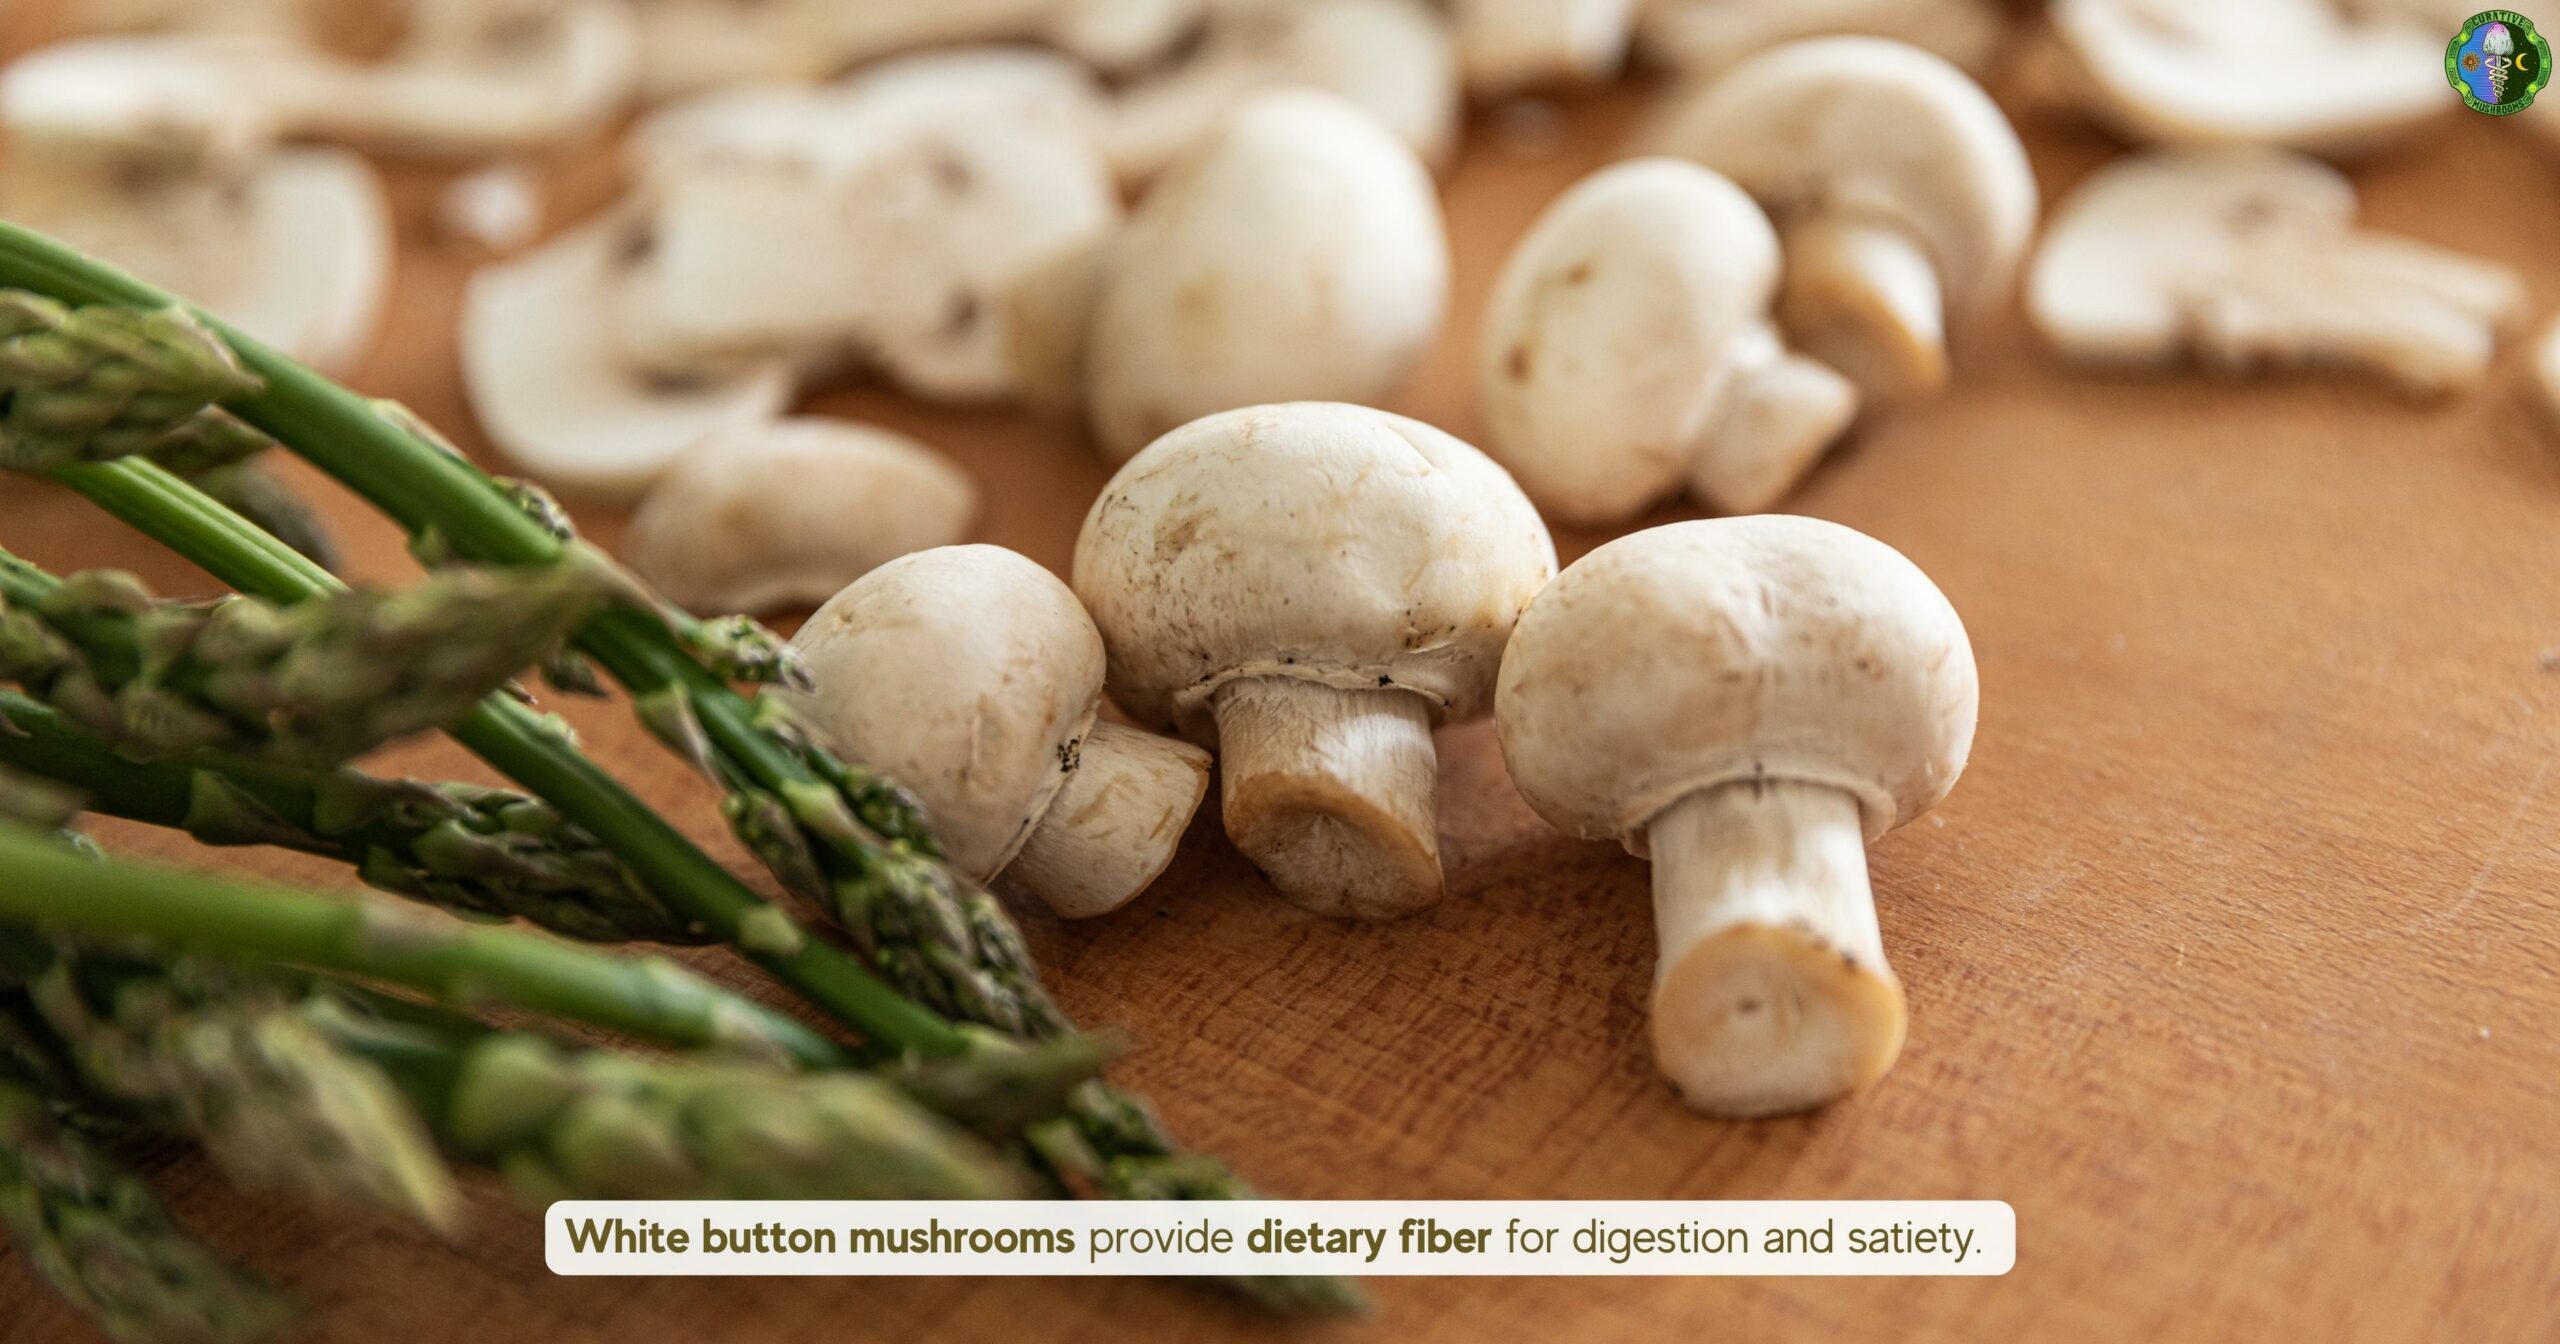 Are white button mushrooms good for you - White button mushrooms provide dietary fiber for digestion and satiety